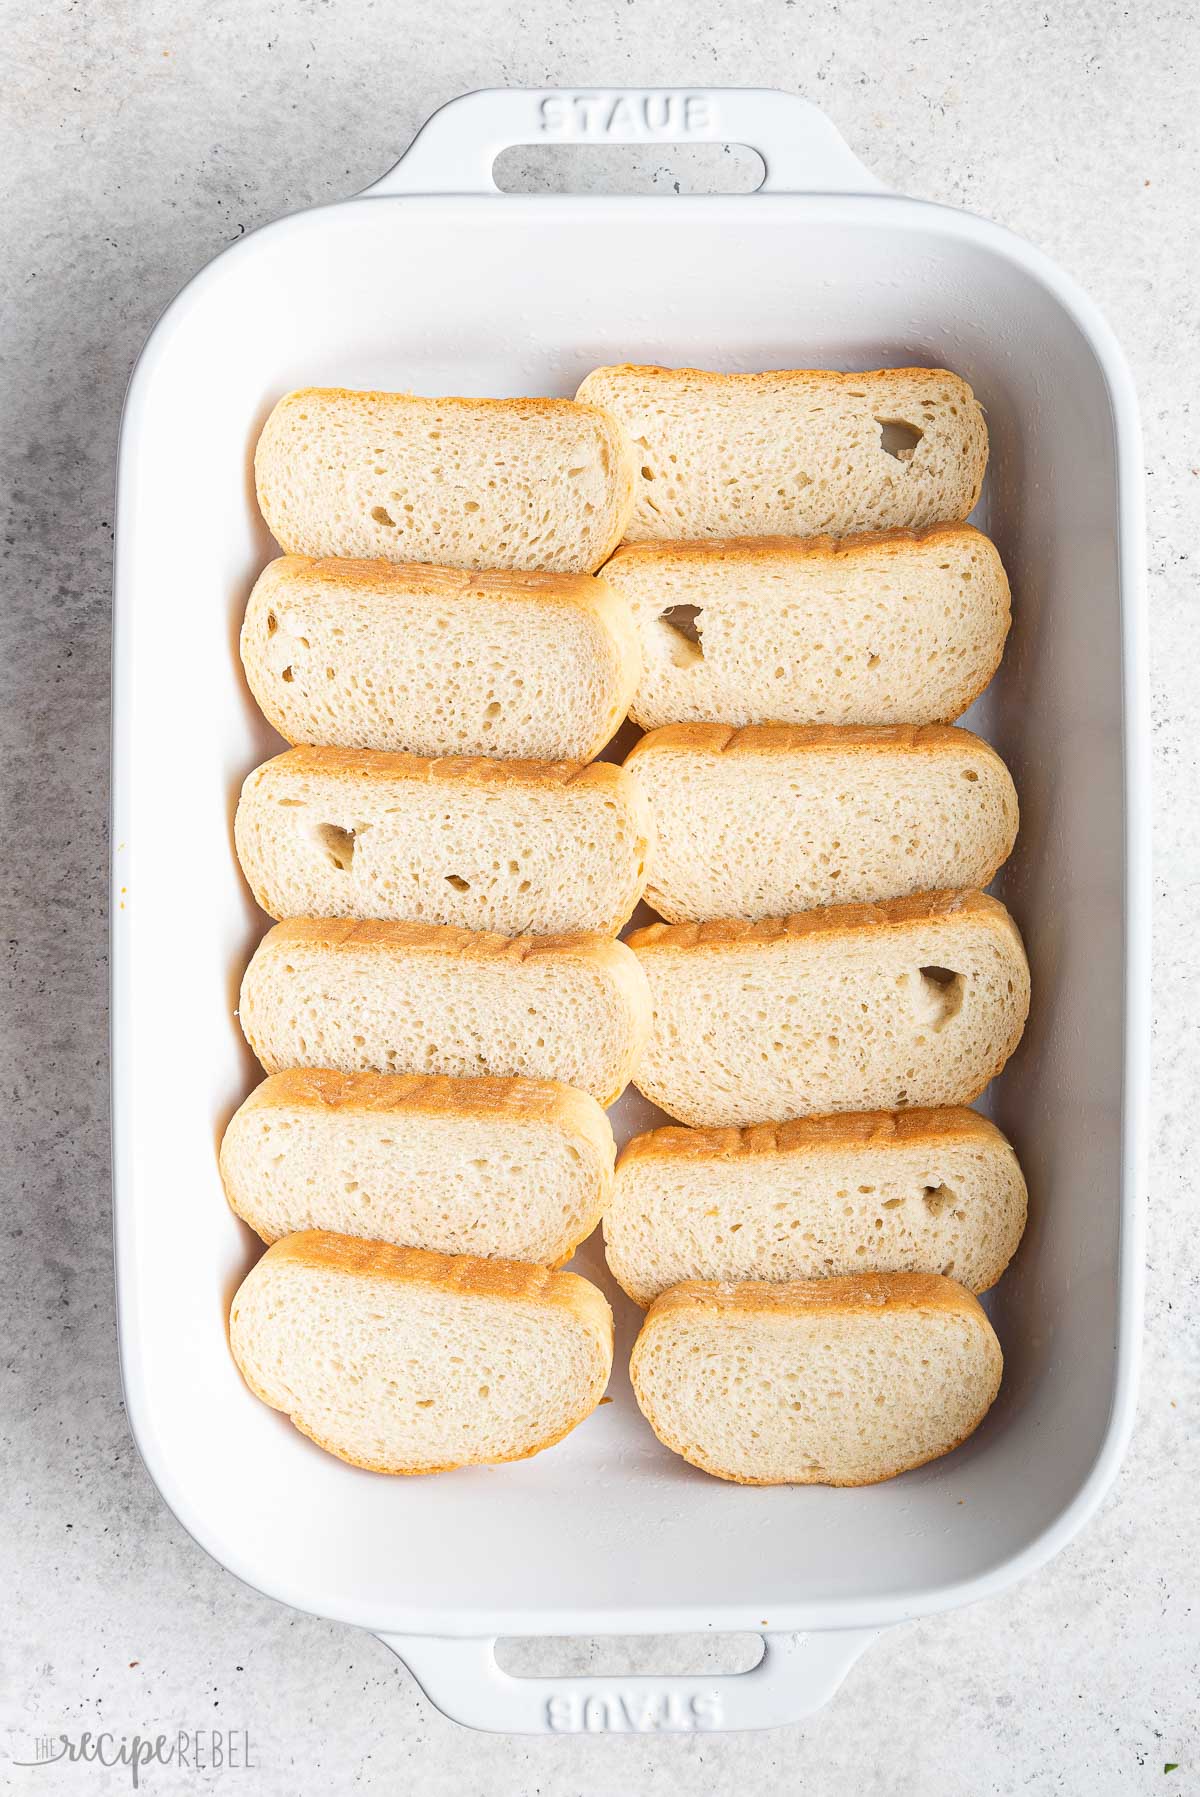 slices of french bread in white baking dish.